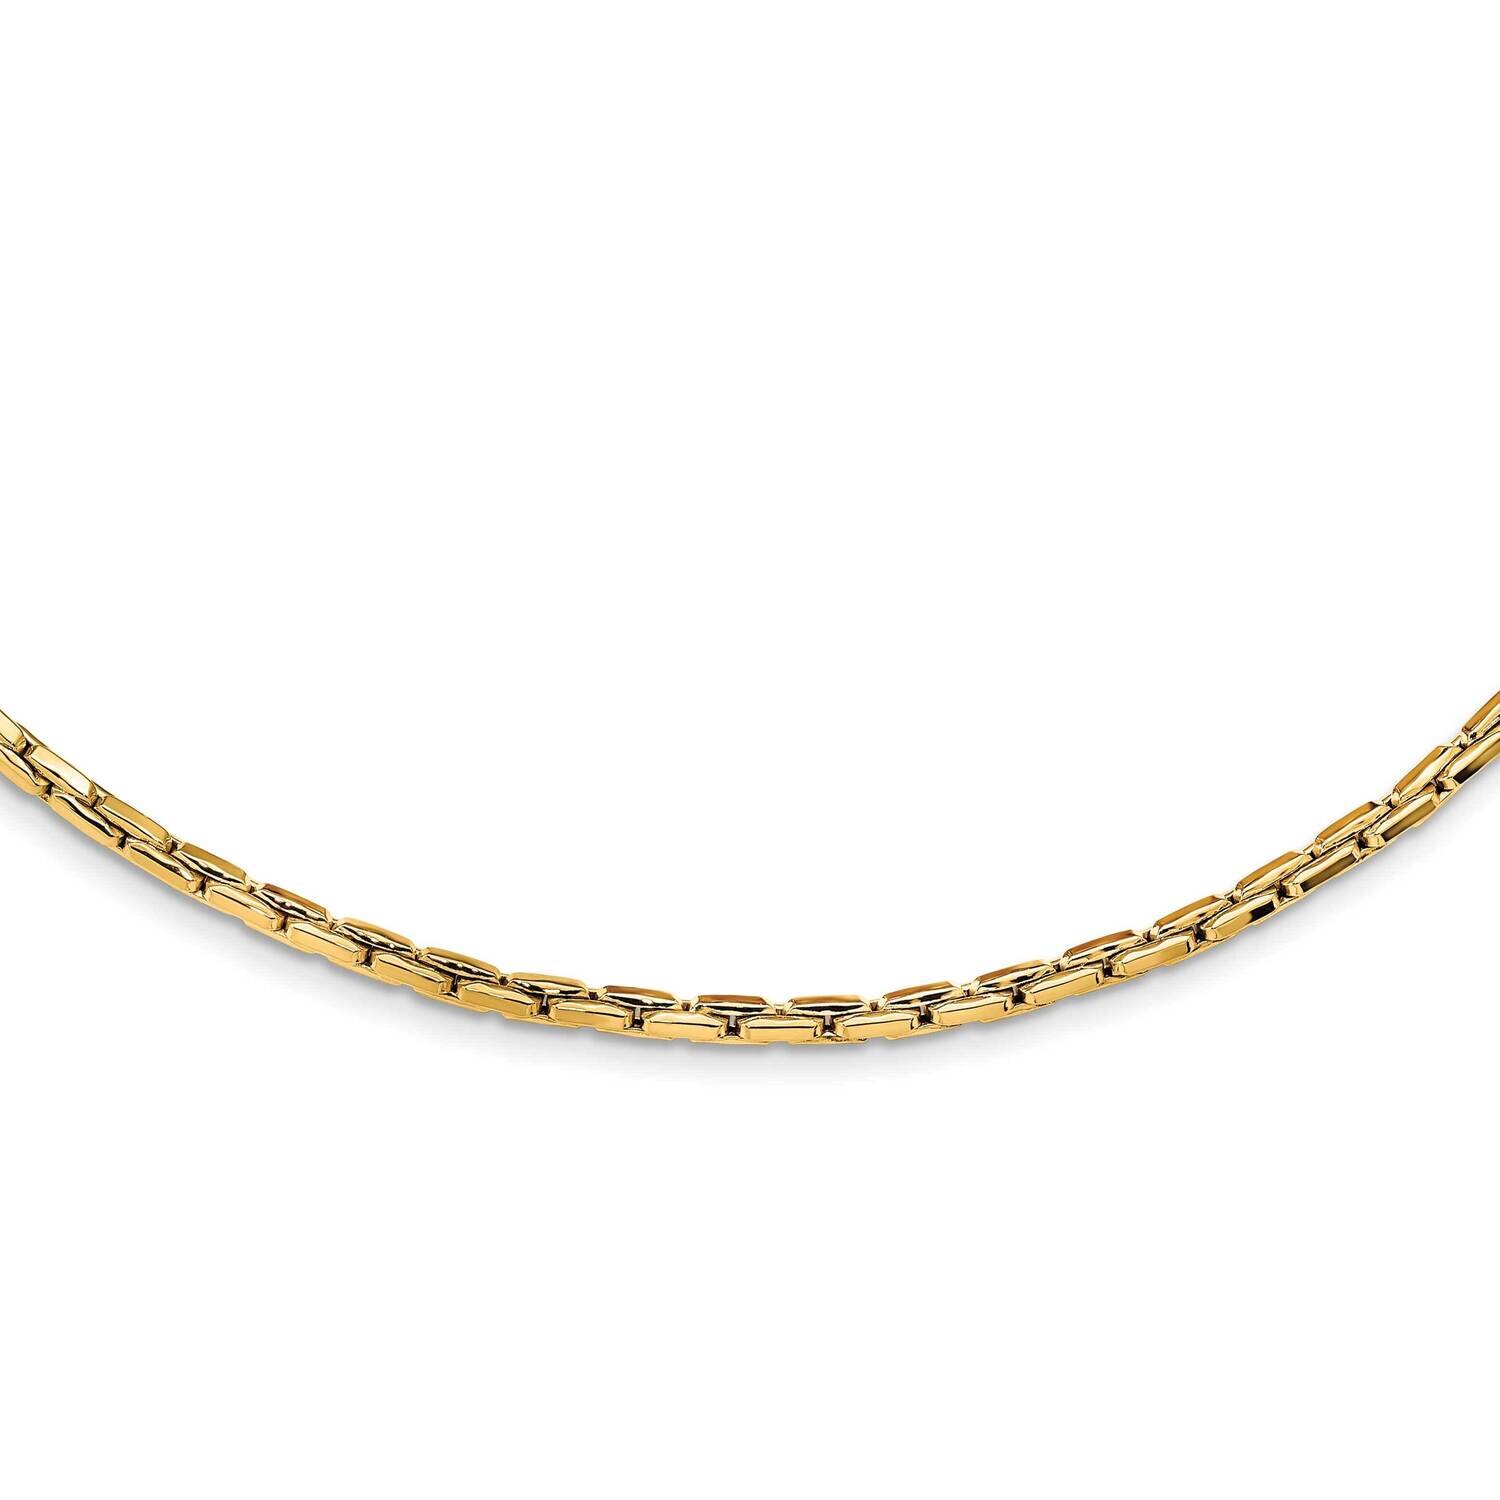 Fancy 3.5mm Round Box Necklace 17 Inch 14k Gold Polished SF2856-17